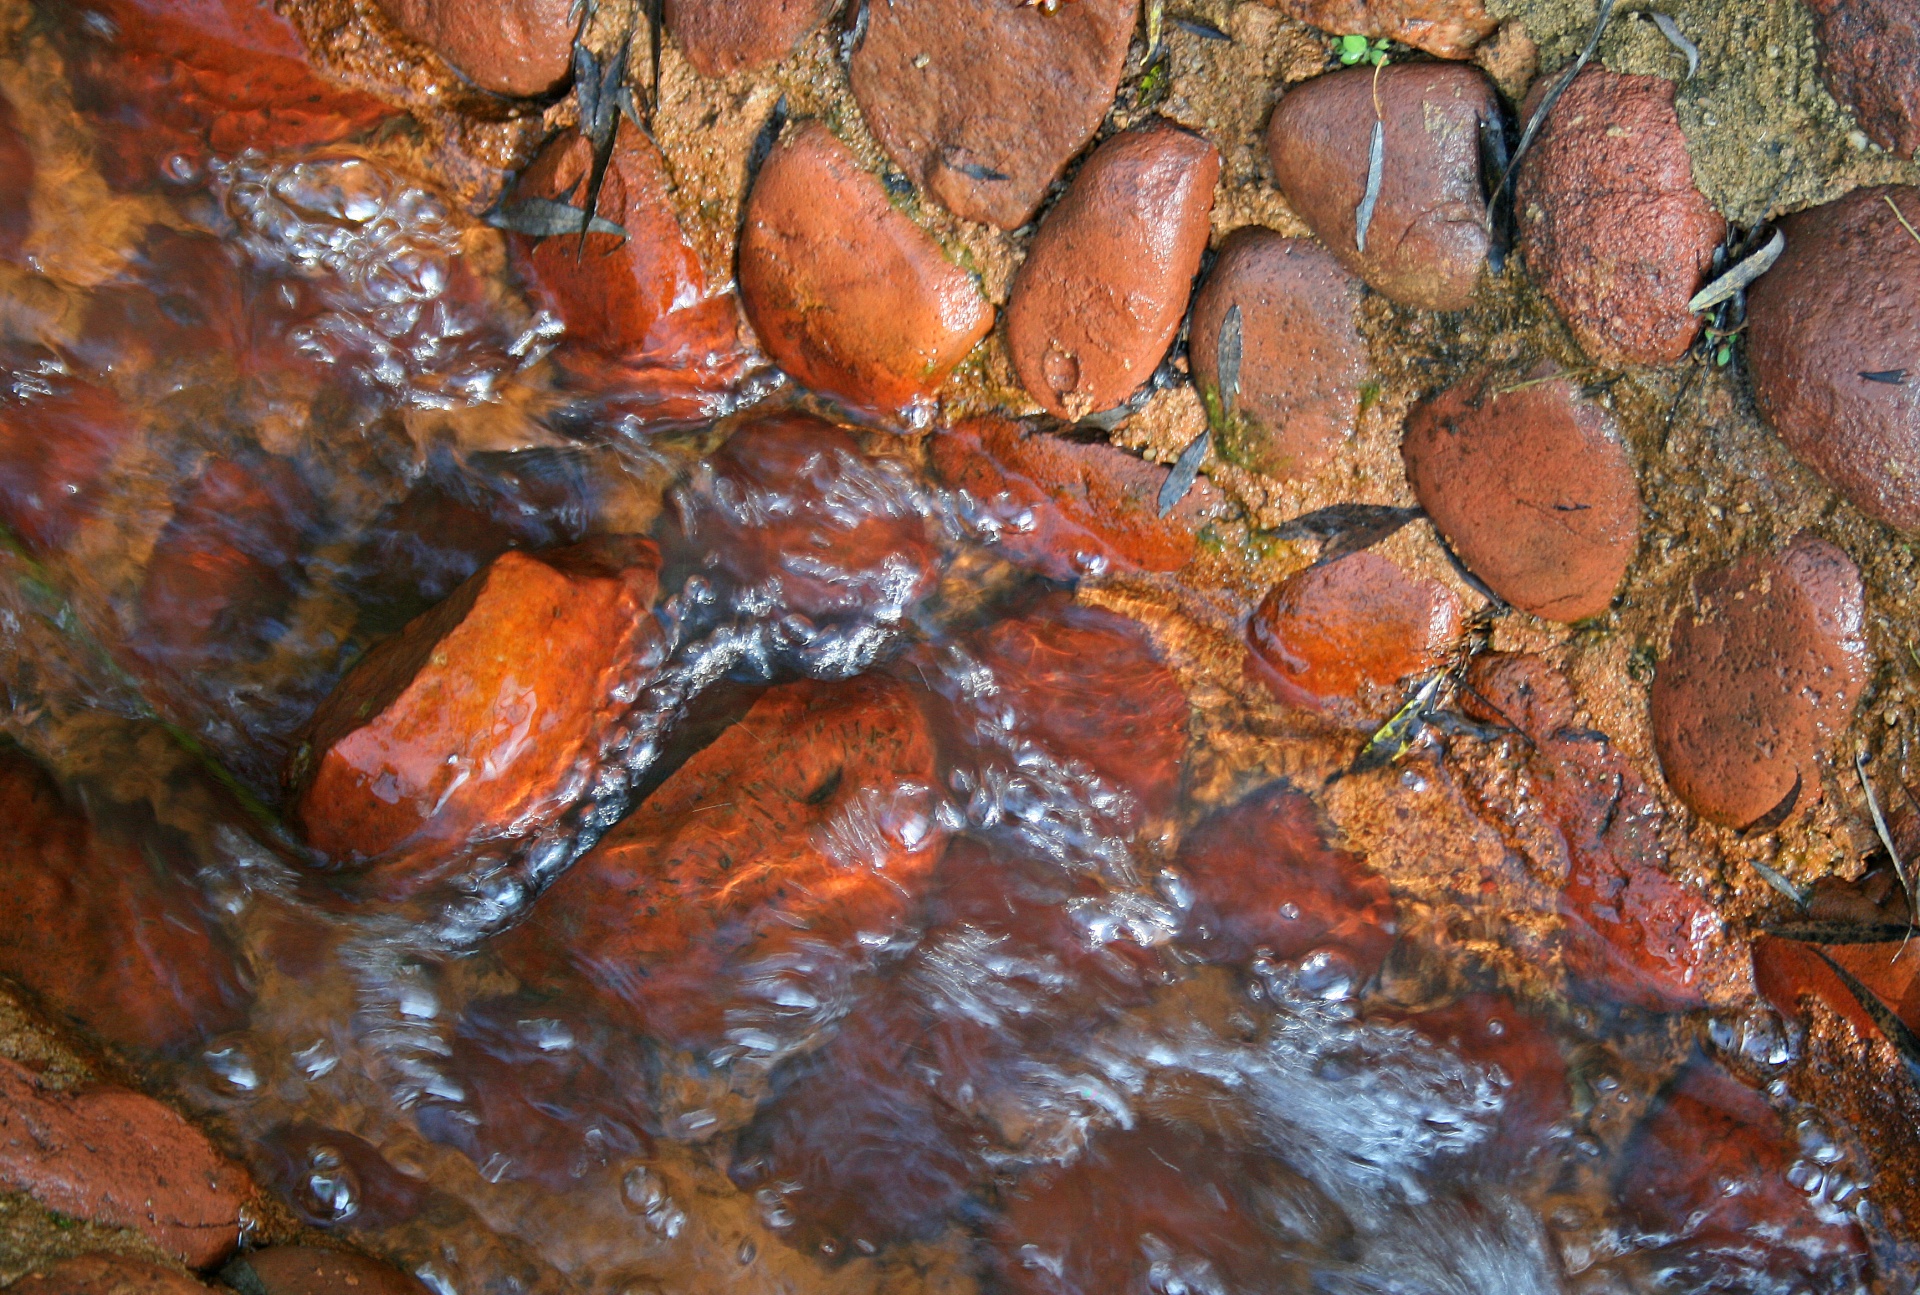 Wet Pebbles In Ditch With Water